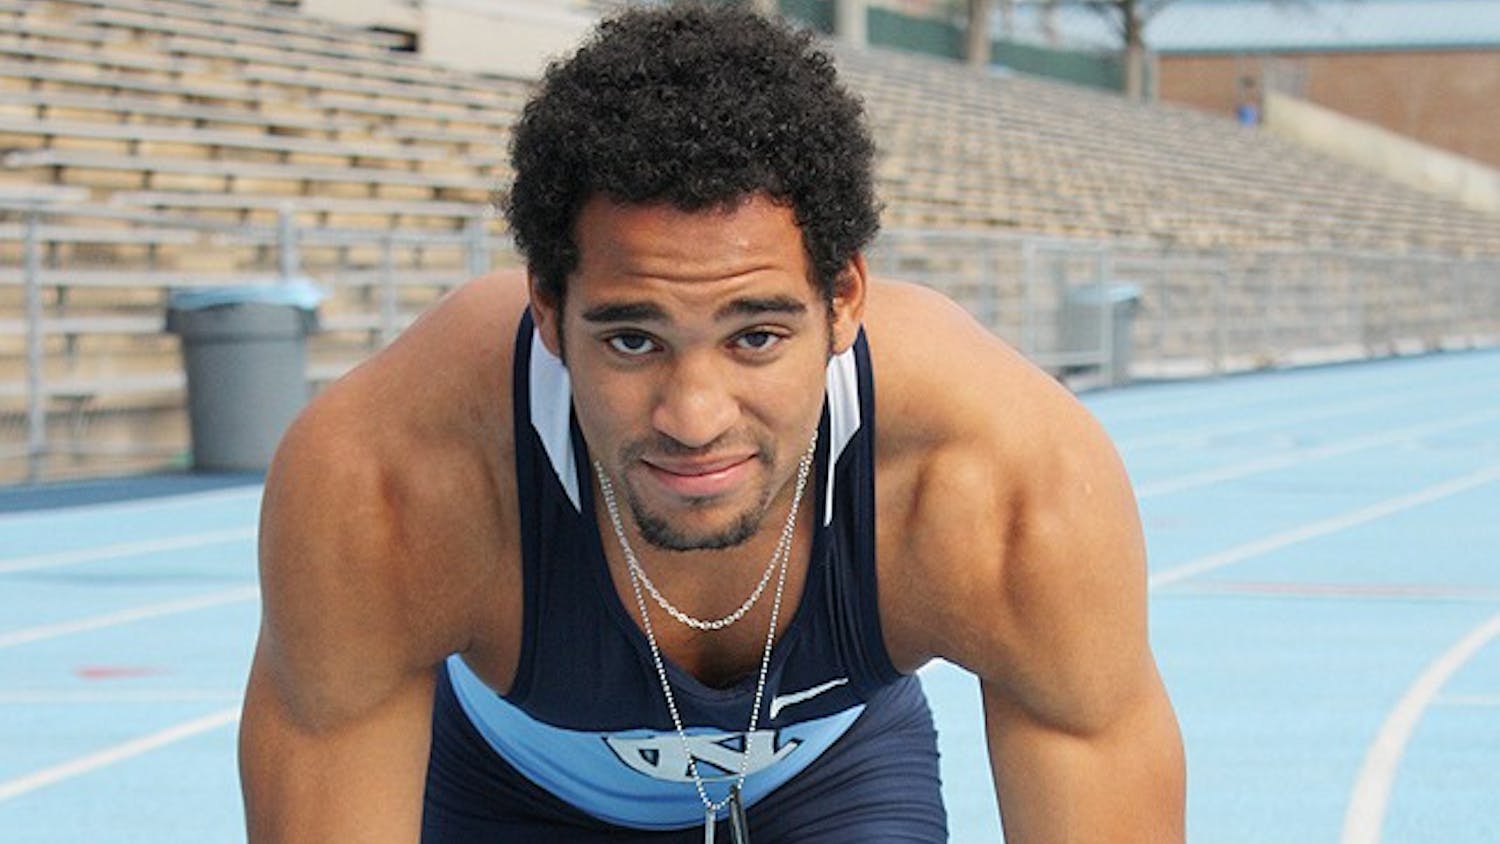 Junior Clayton Parros, a runner at UNC, is racing in the Olympic Trials in Oregon this summer.  Parros runs the 400 meter race.